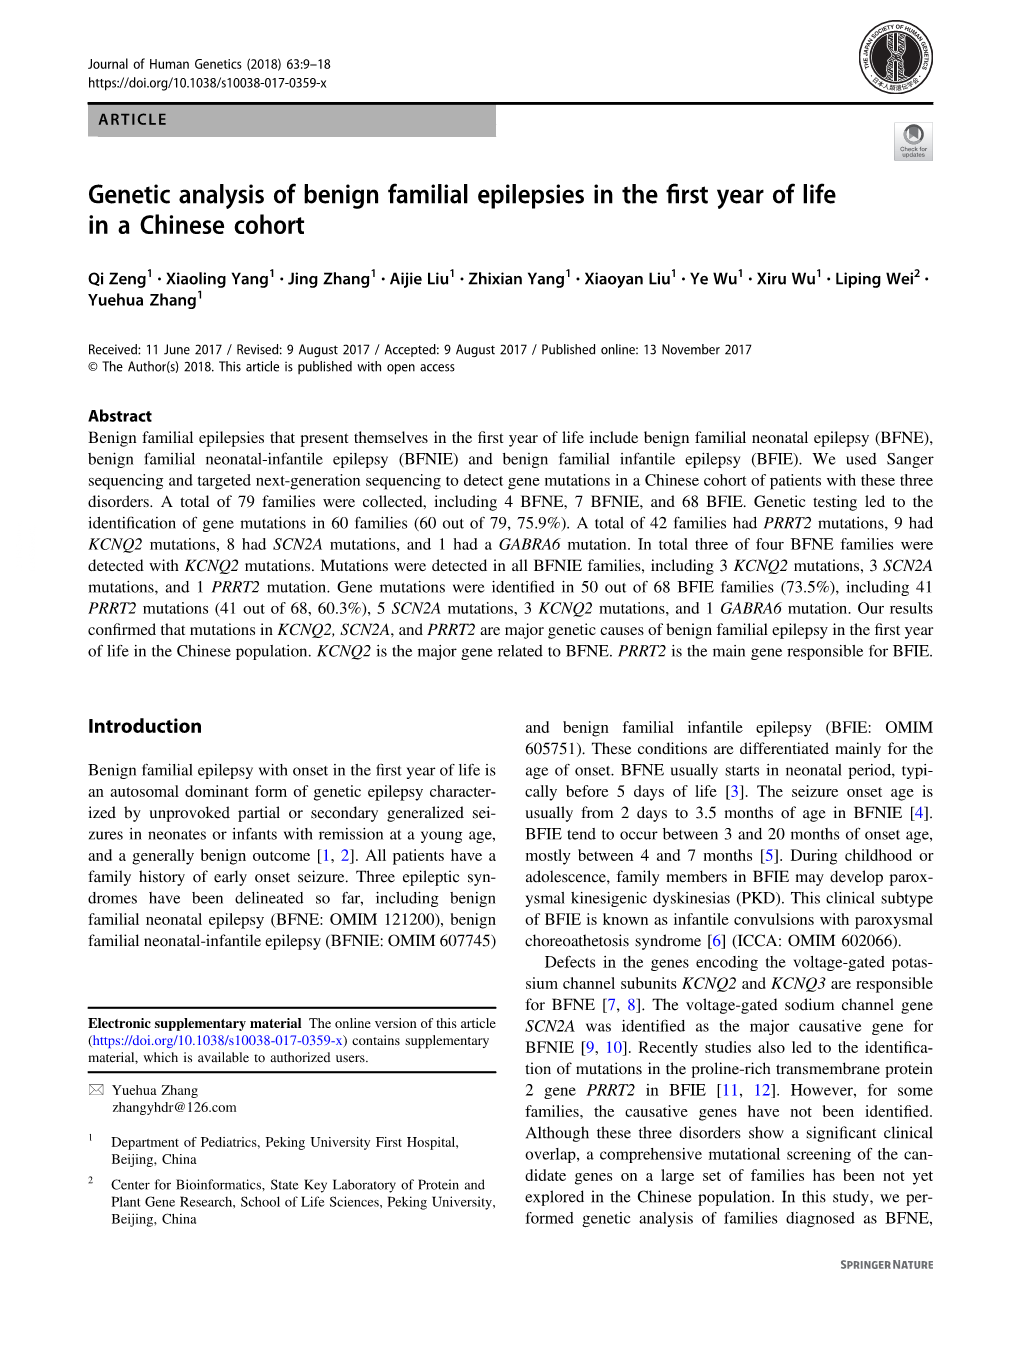 Genetic Analysis of Benign Familial Epilepsies in the First Year of Life in A